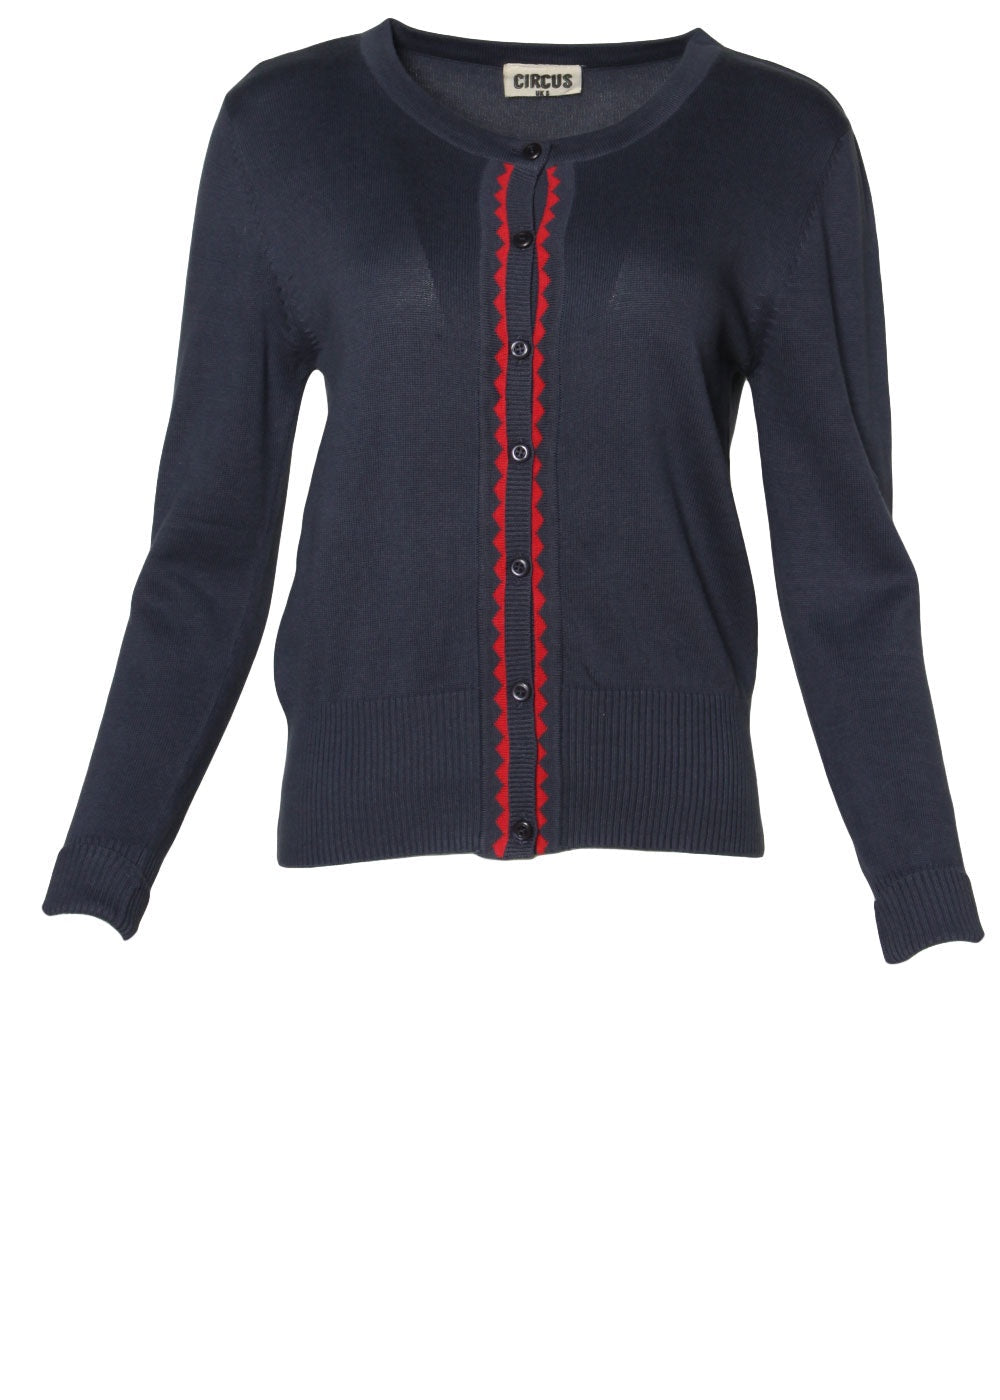 Circus Navy/Aurora Red Knit-Womens-Ohh! By Gum - Shop Sustainable